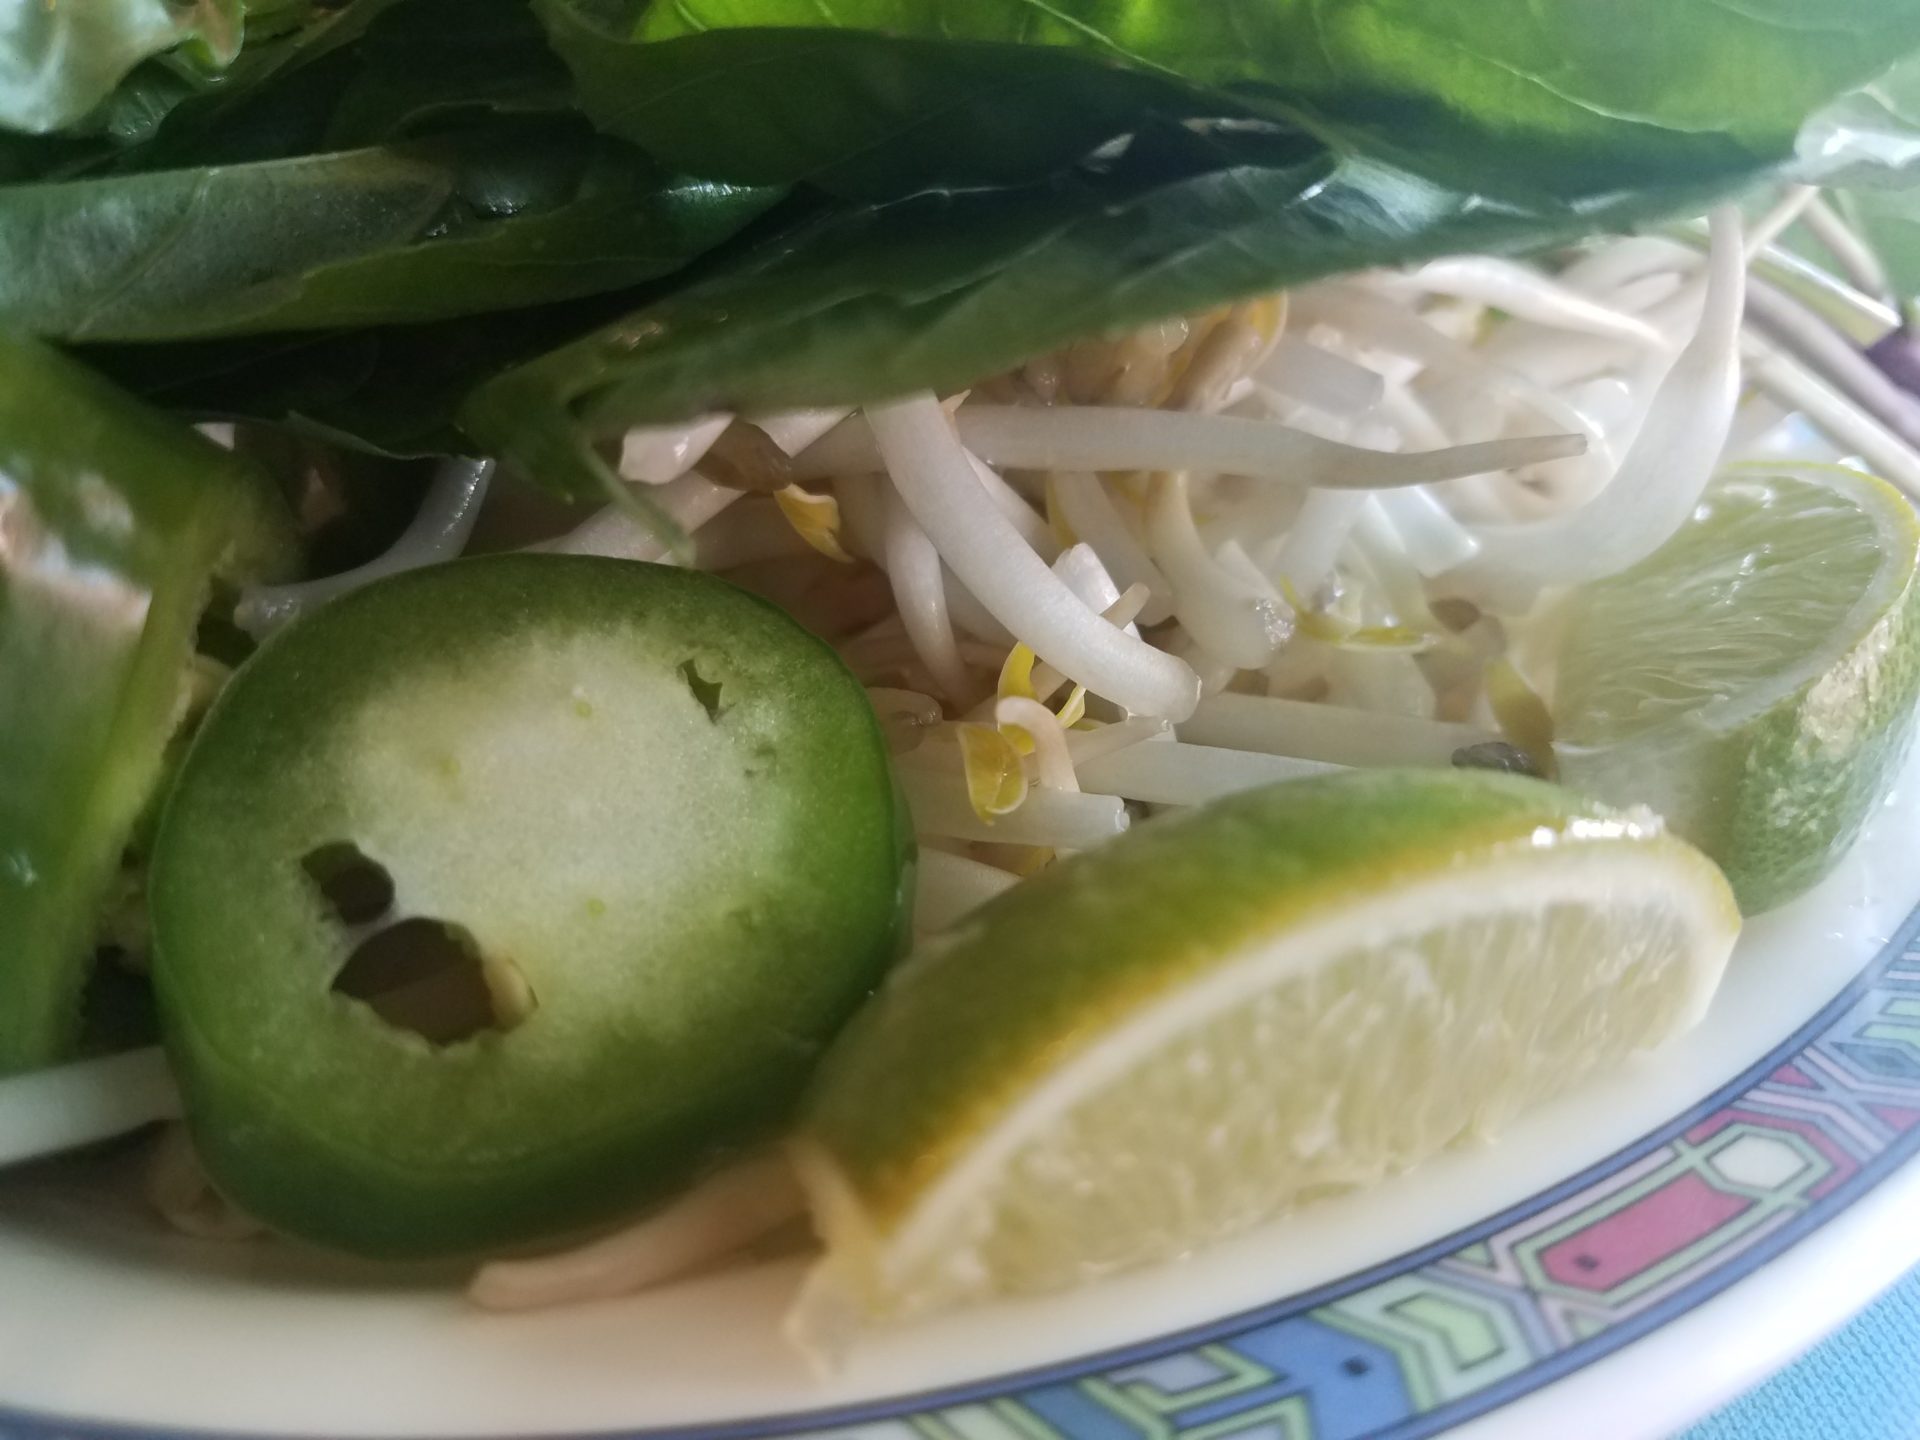 a plate of food with vegetables and limes